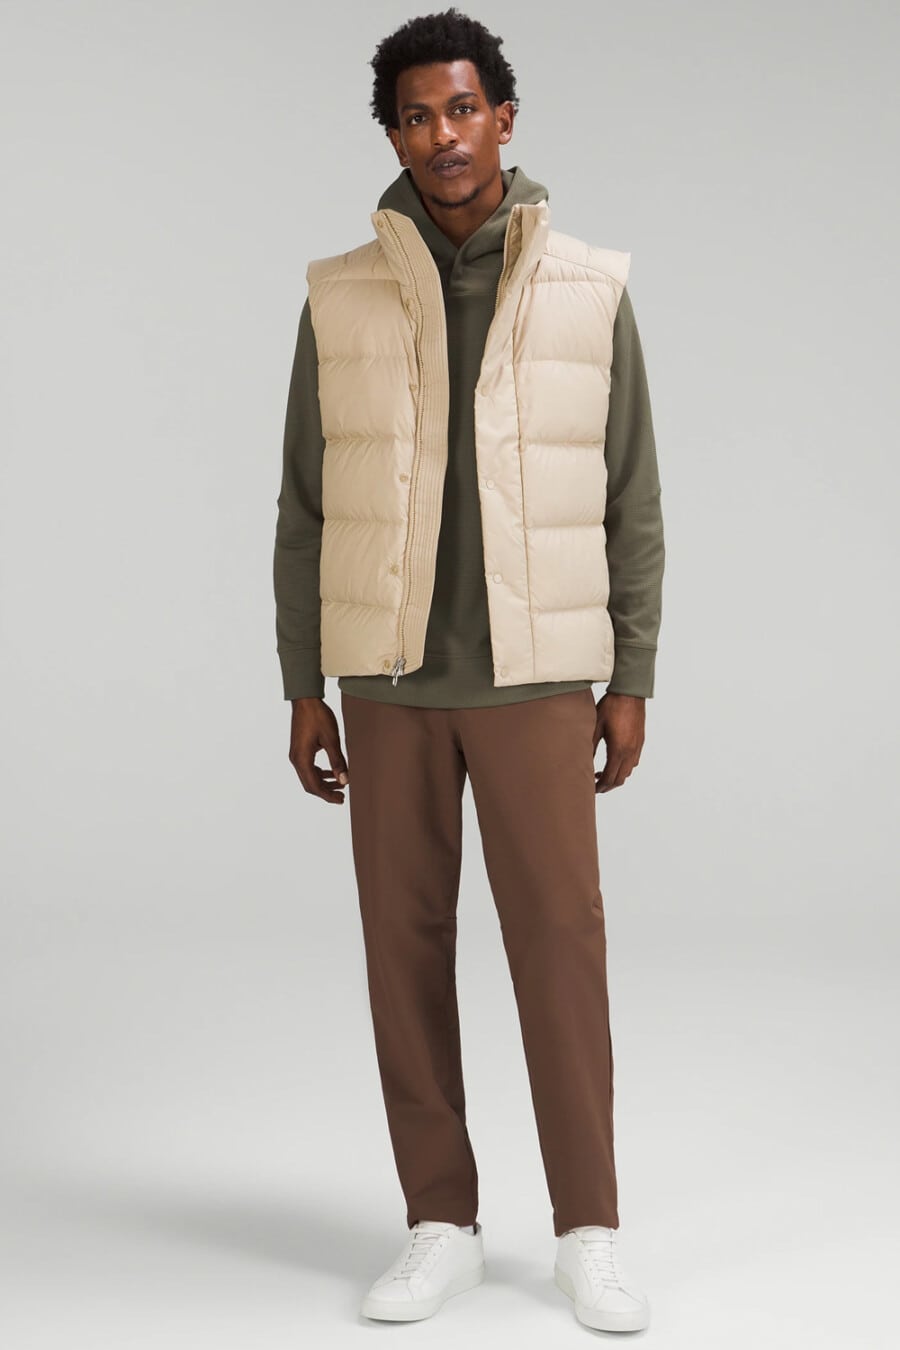 Men's brown pants, green hoodie, cream puffer vest and white sneakers outfit